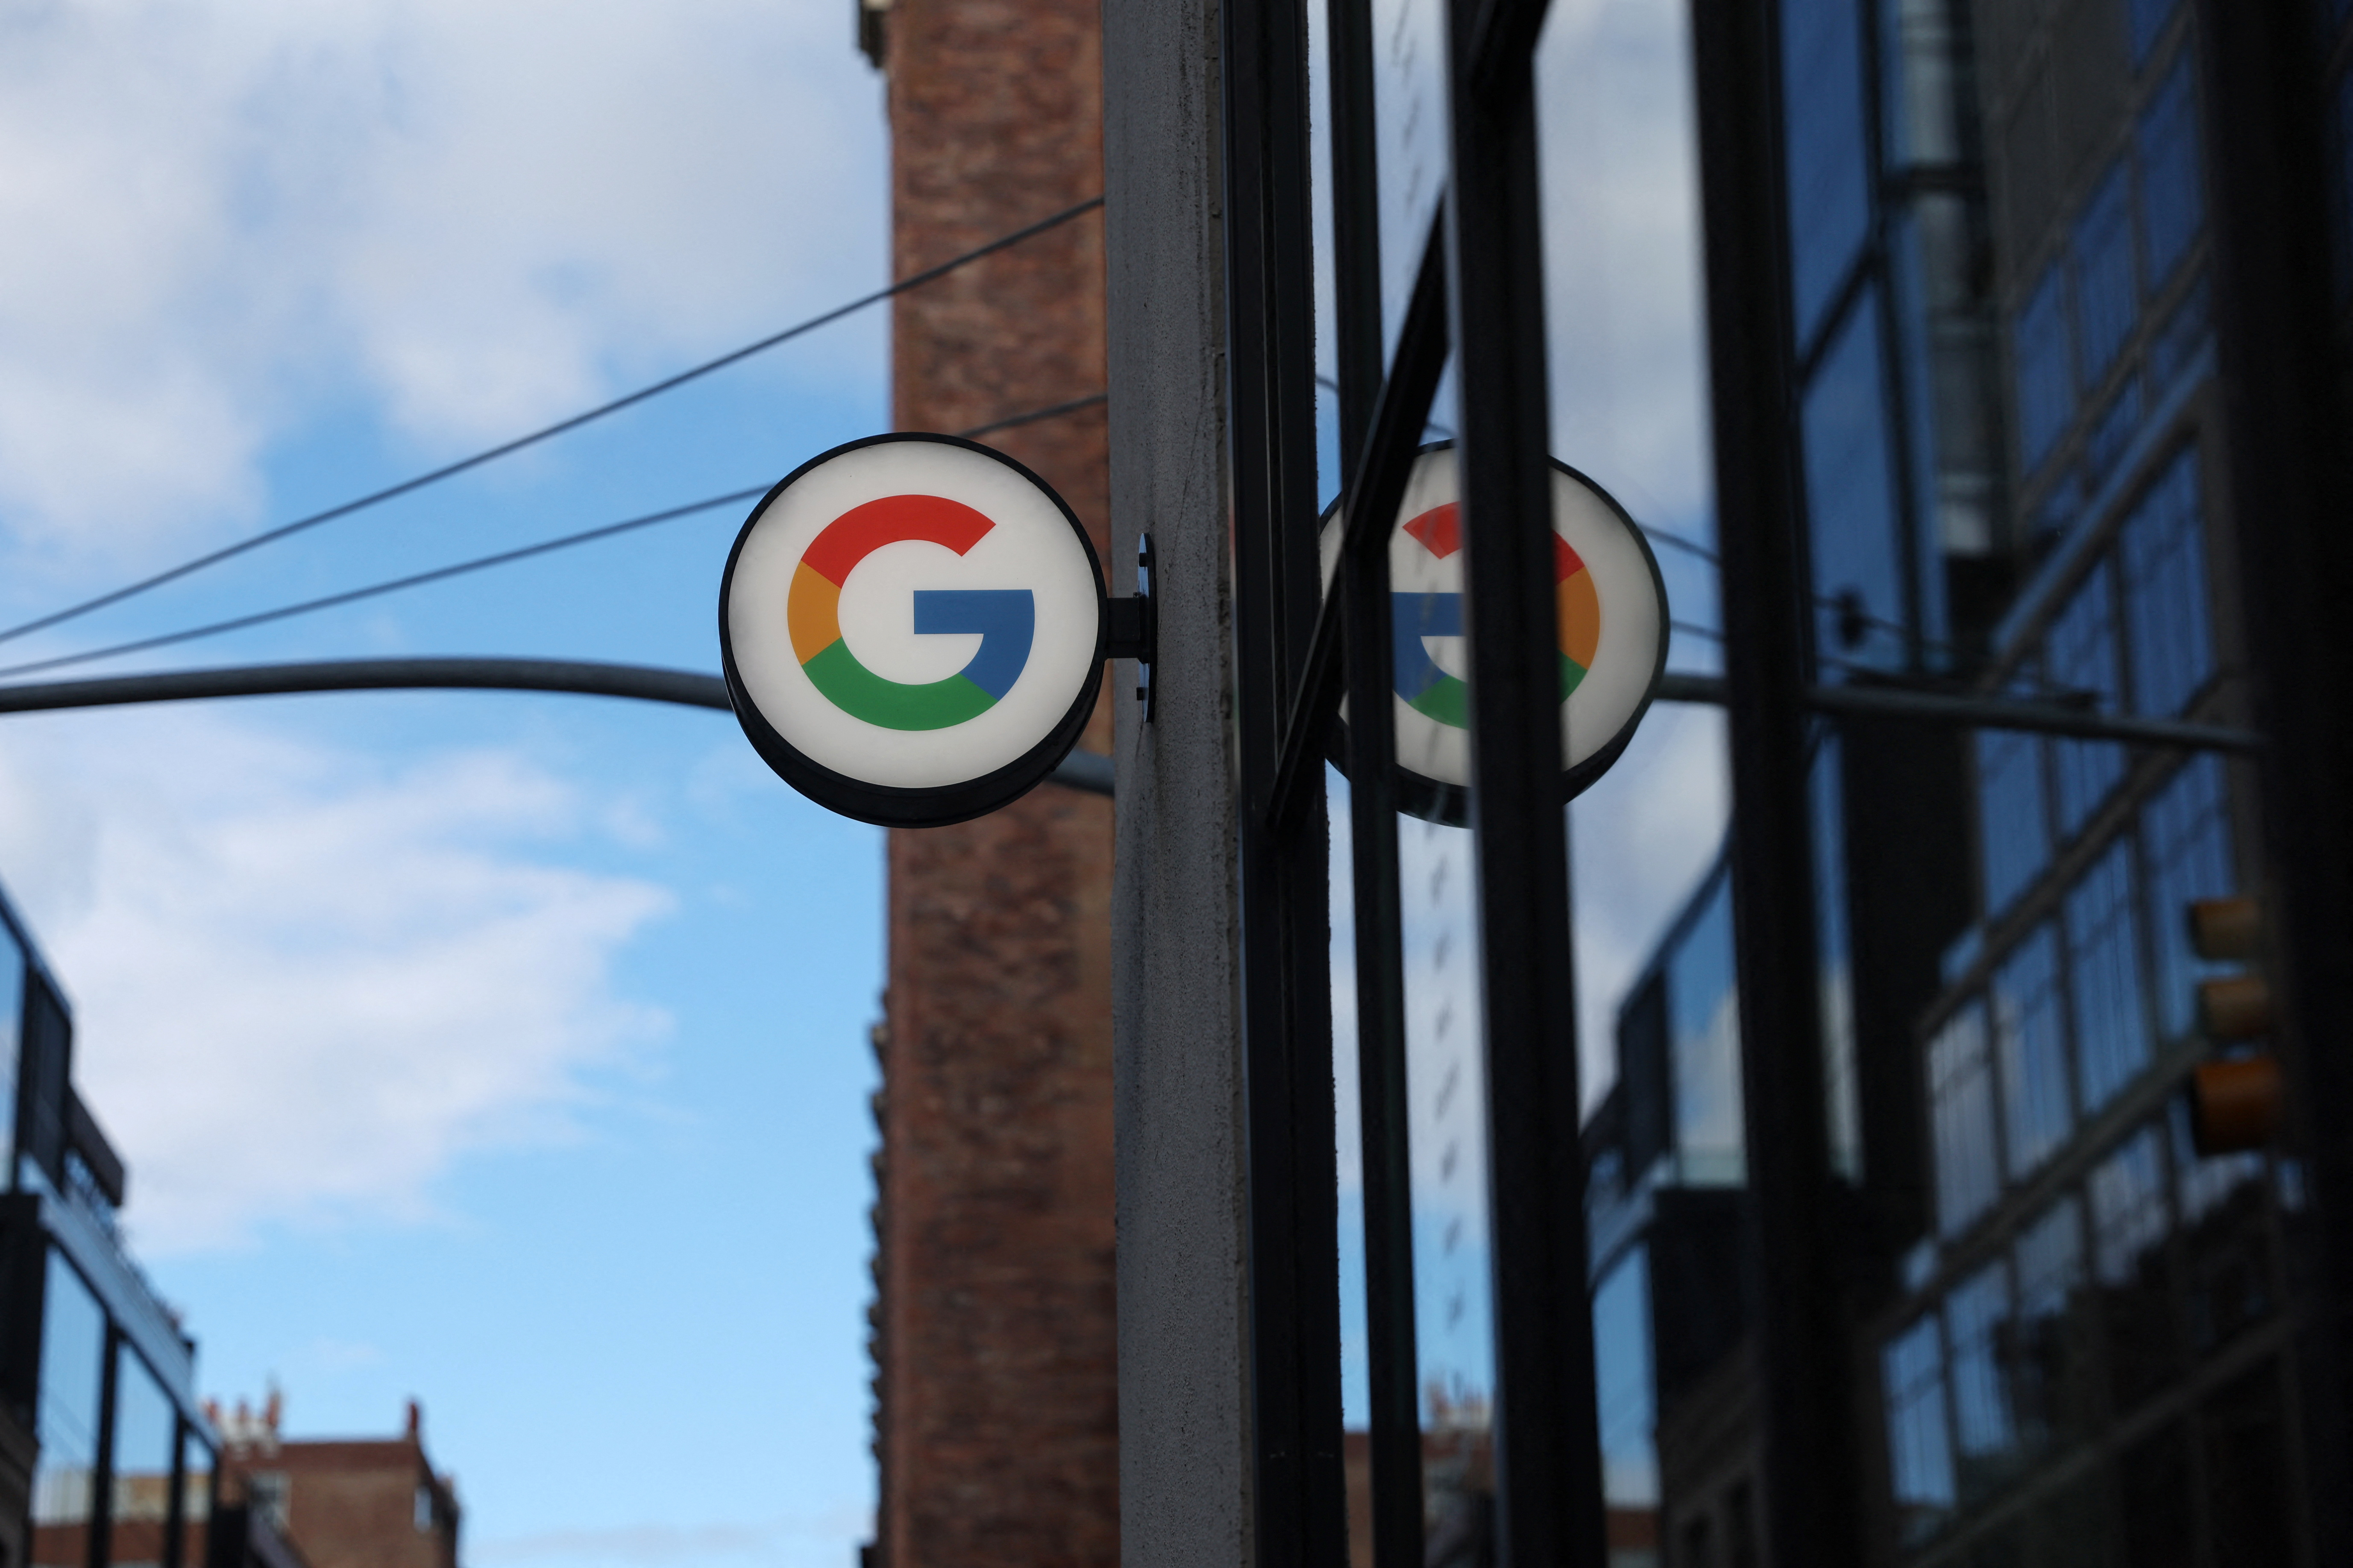 The logo of Google LLC can be seen in the Google Store Chelsea in New York City